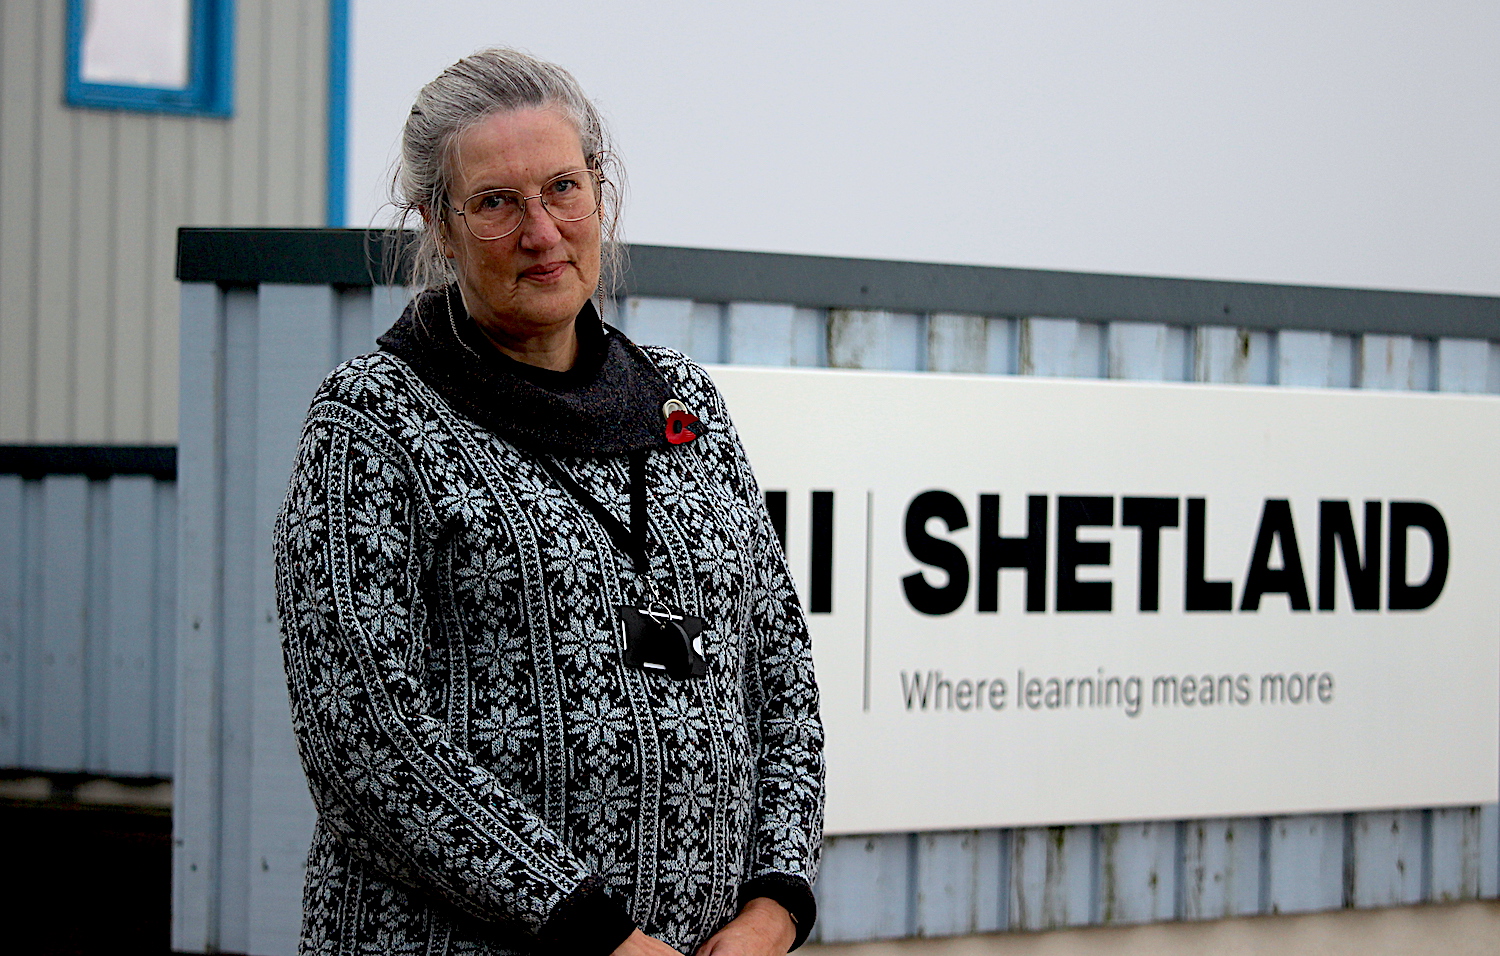 Funding model disadvantages island colleges such as UHI Shetland, principal claims